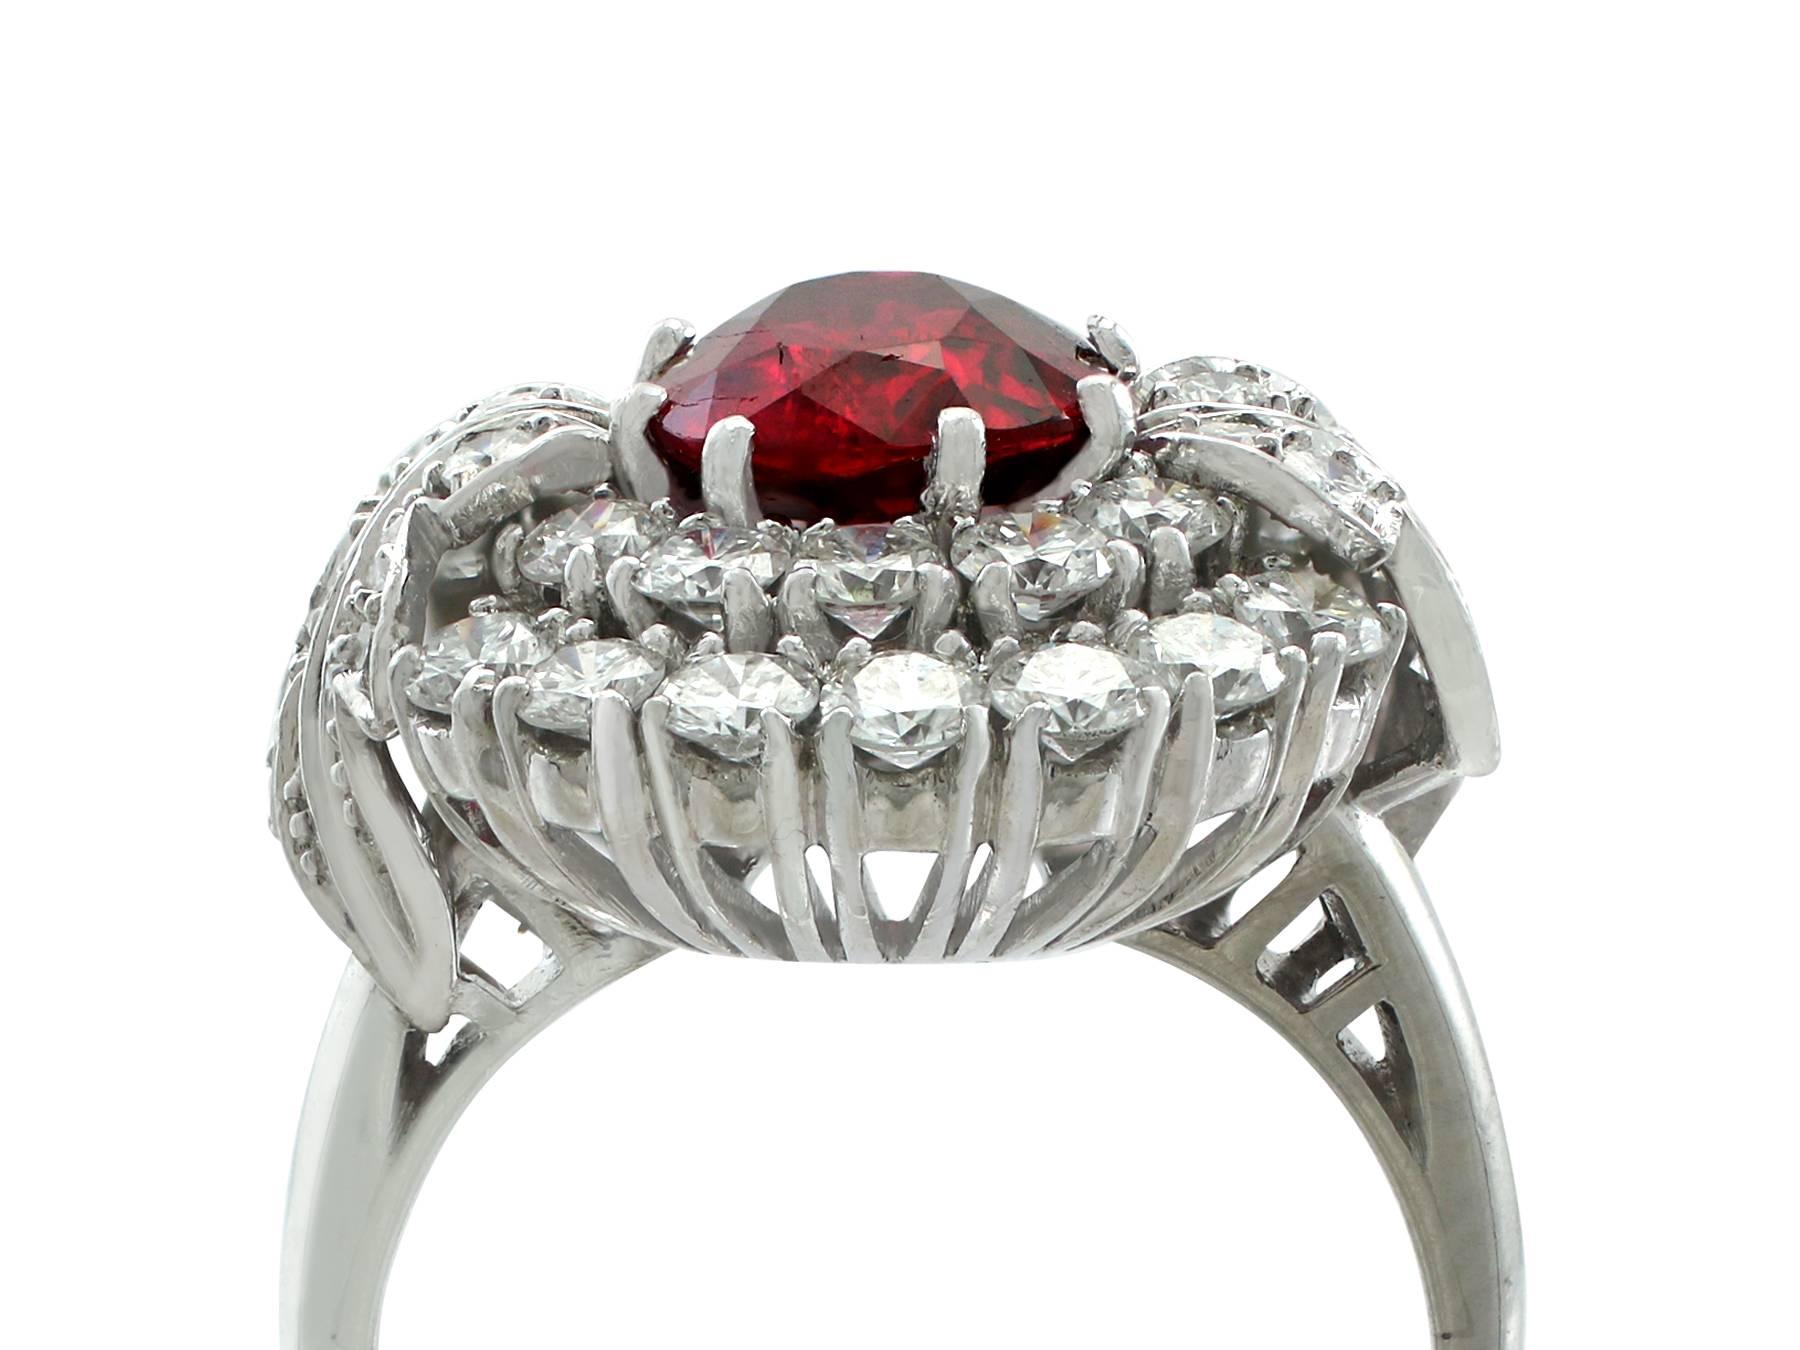 A stunning and impressive vintage 2.85 carat natural, unheated ruby and 2.48 carat diamond, platinum cocktail ring; part of our diverse vintage gemstone jewelry collections

This stunning, fine and impressive cushion cut ruby and diamond ring has